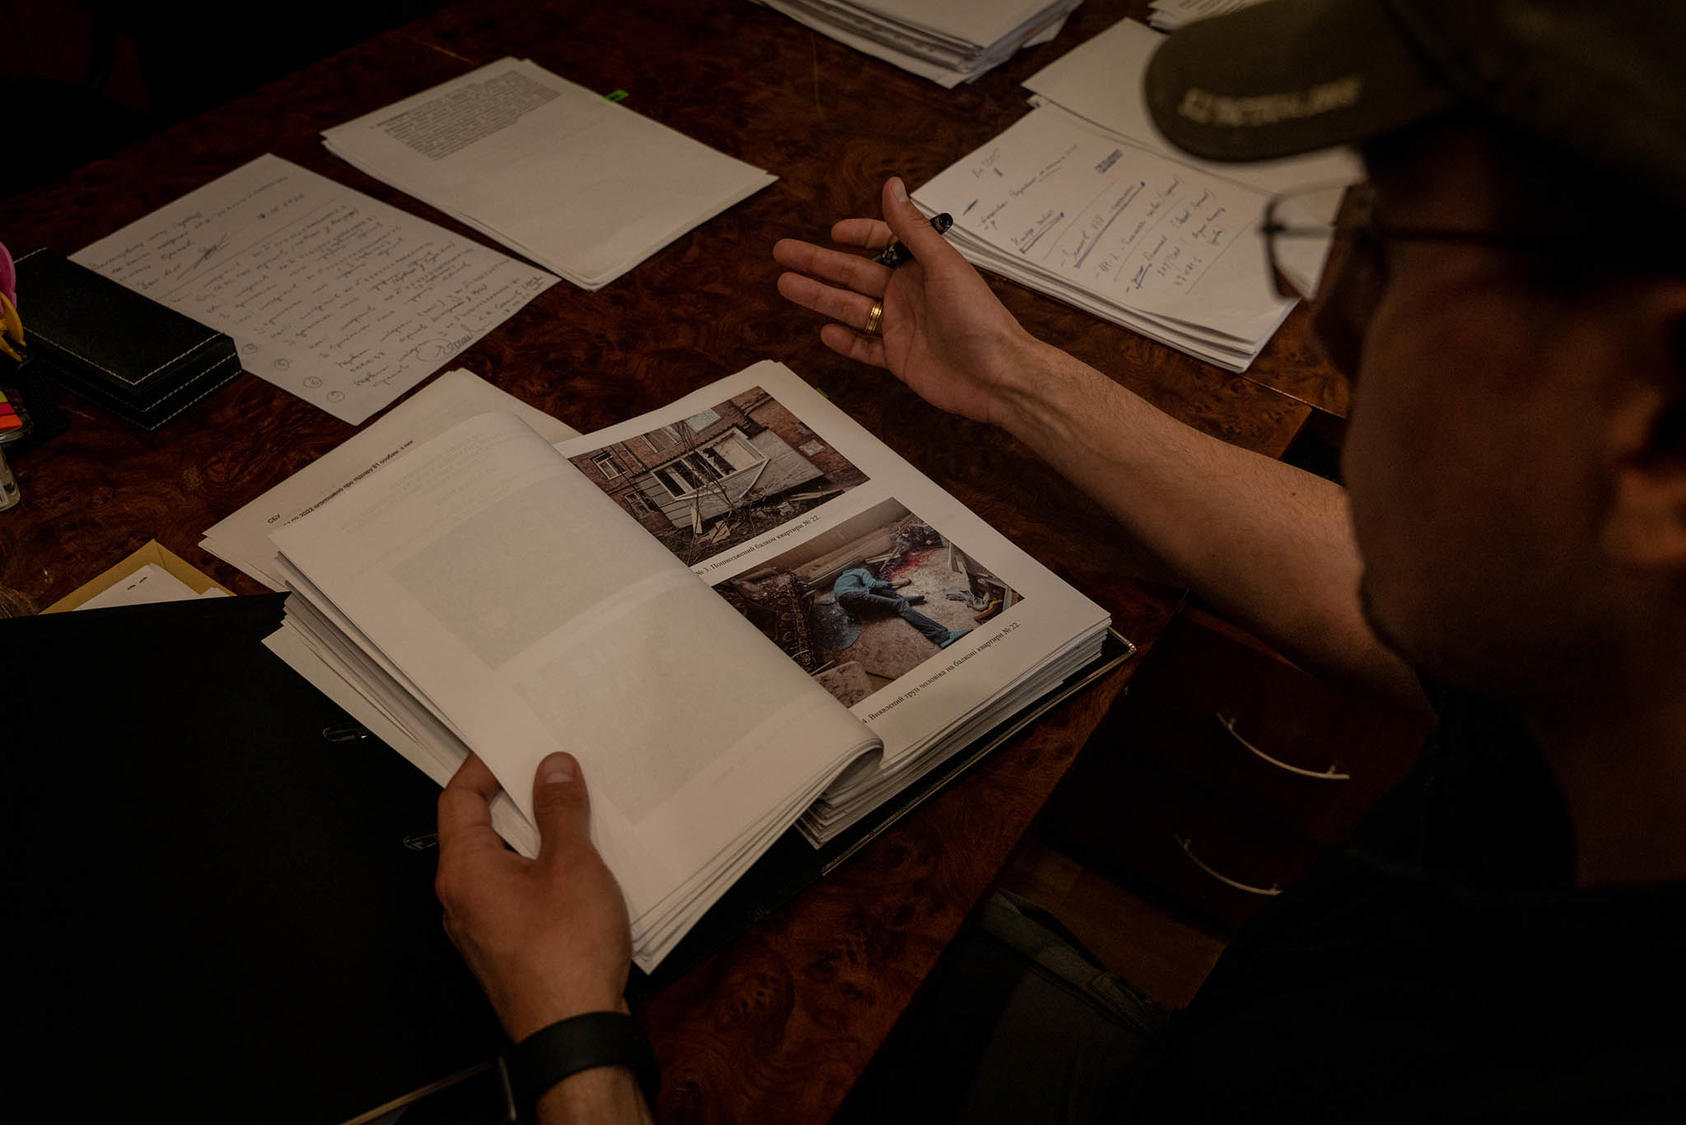 Police officer Andriy Andriychuk looks through files documenting potential war crimes, Kharkiv, Ukraine, May 2022. This year’s Nobel Peace Prize recognizes the role documenters play in holding governments accountable. (Nicole Tung/The New York Times)